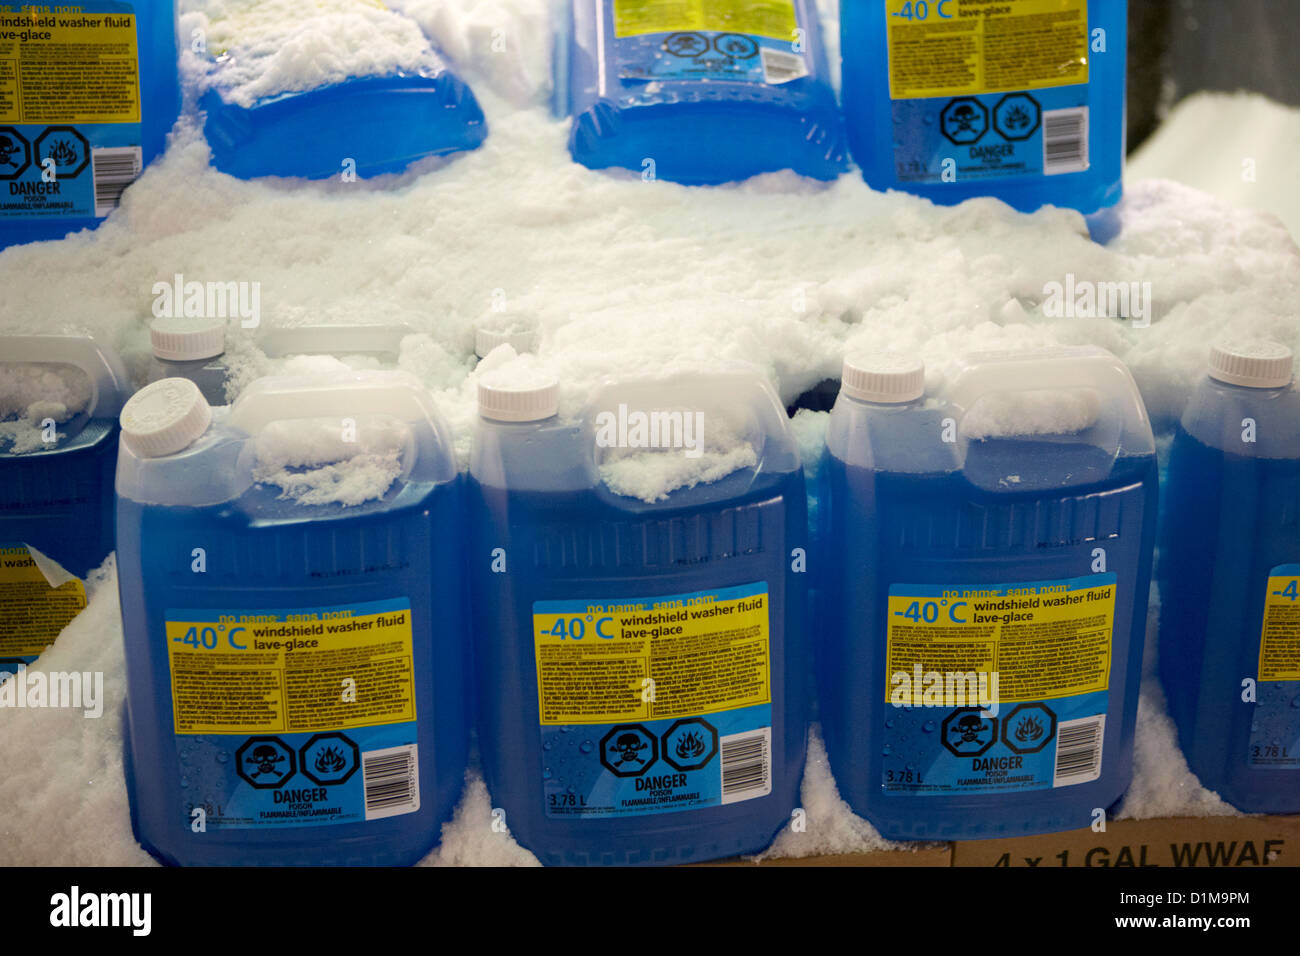 -40c windshield washer fluid covered in snow for sale outside store in Saskatoon Saskatchewan Canada Stock Photo